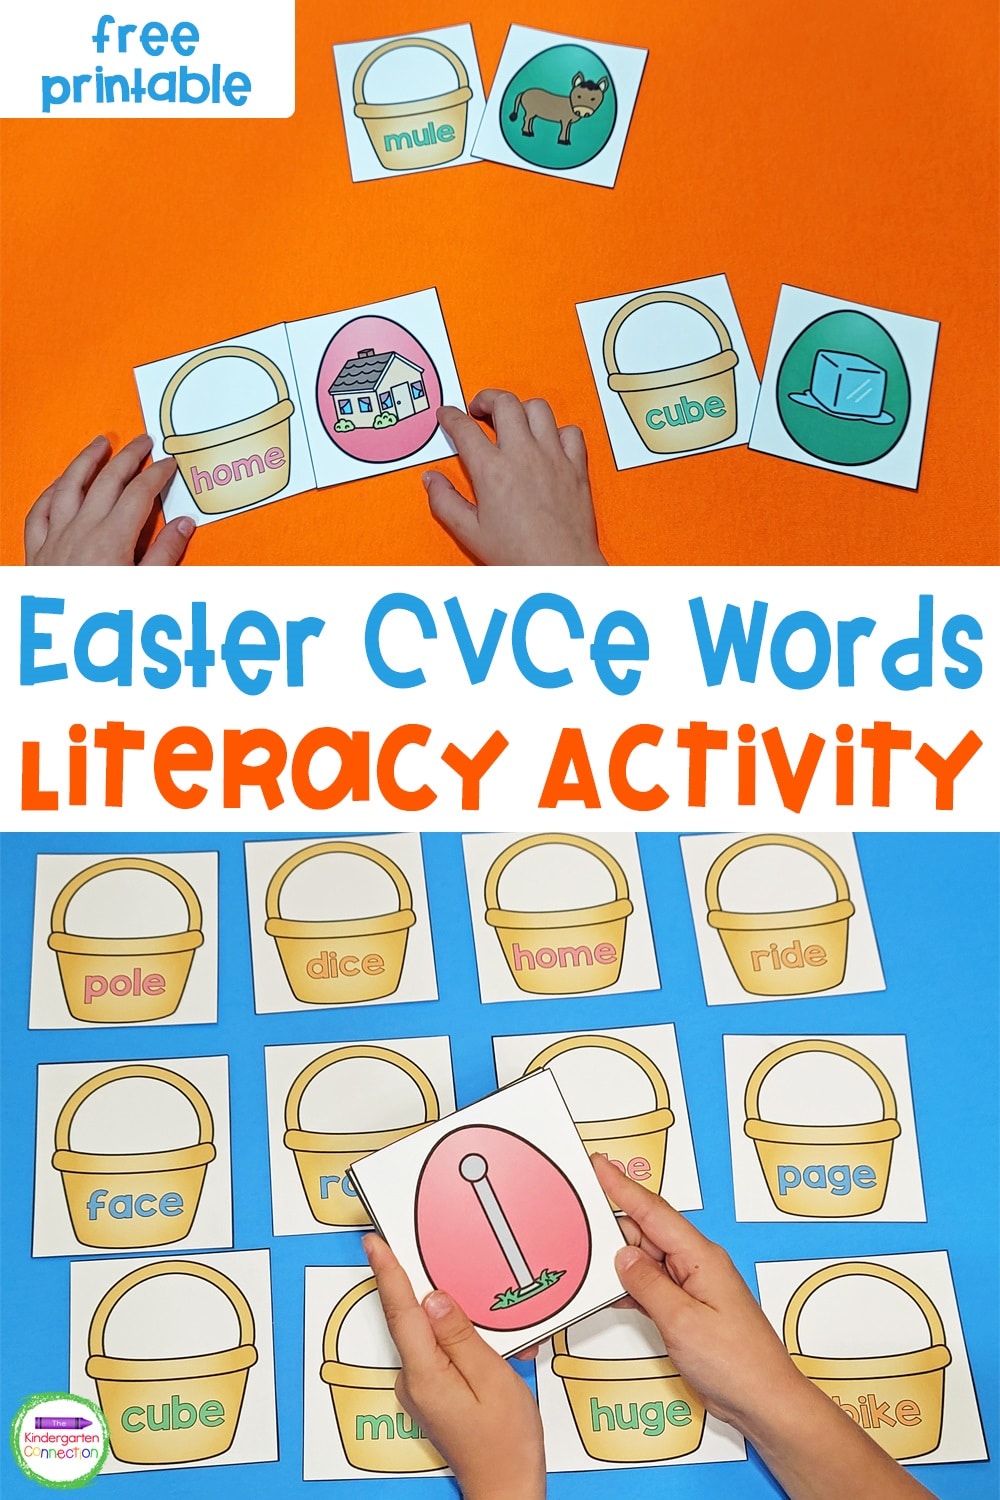 Get our FREE printable Easter CVCe Words Matching Game for your Kindergarten or 1st grade literacy centers this spring!